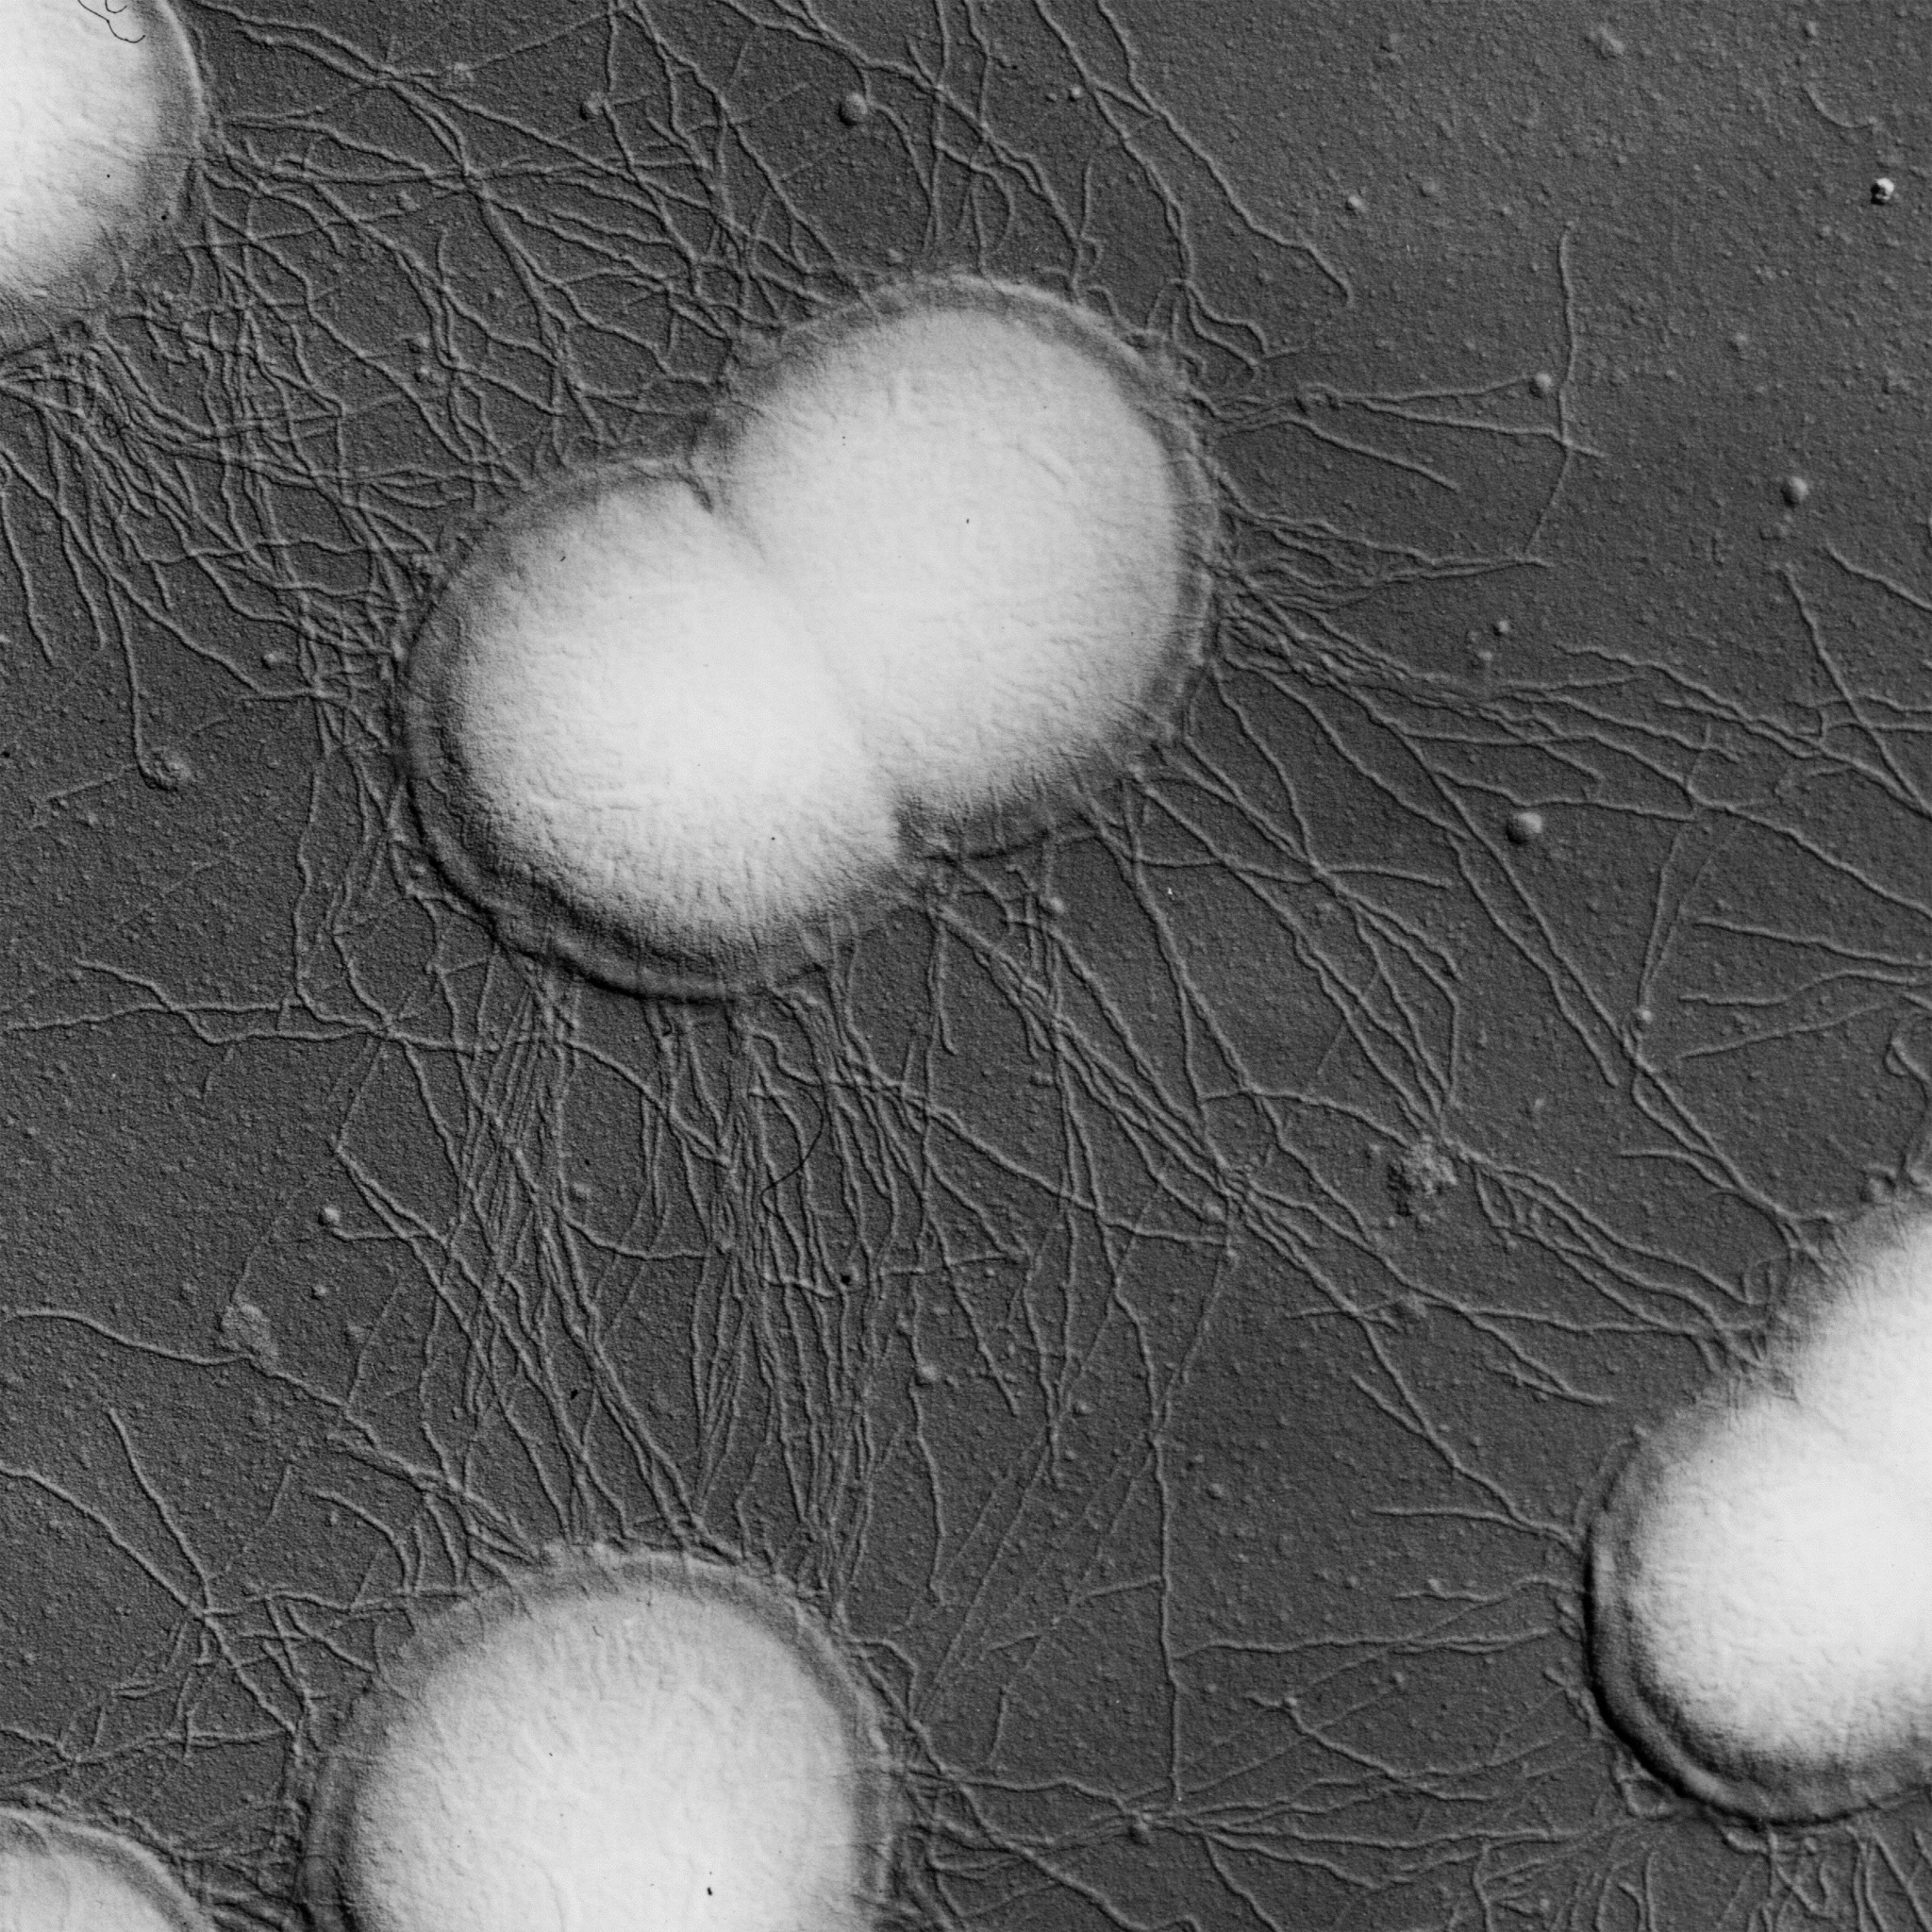 Scanning electron micrograph of type IV pilus filaments on Neisseria gonorrhoeae.